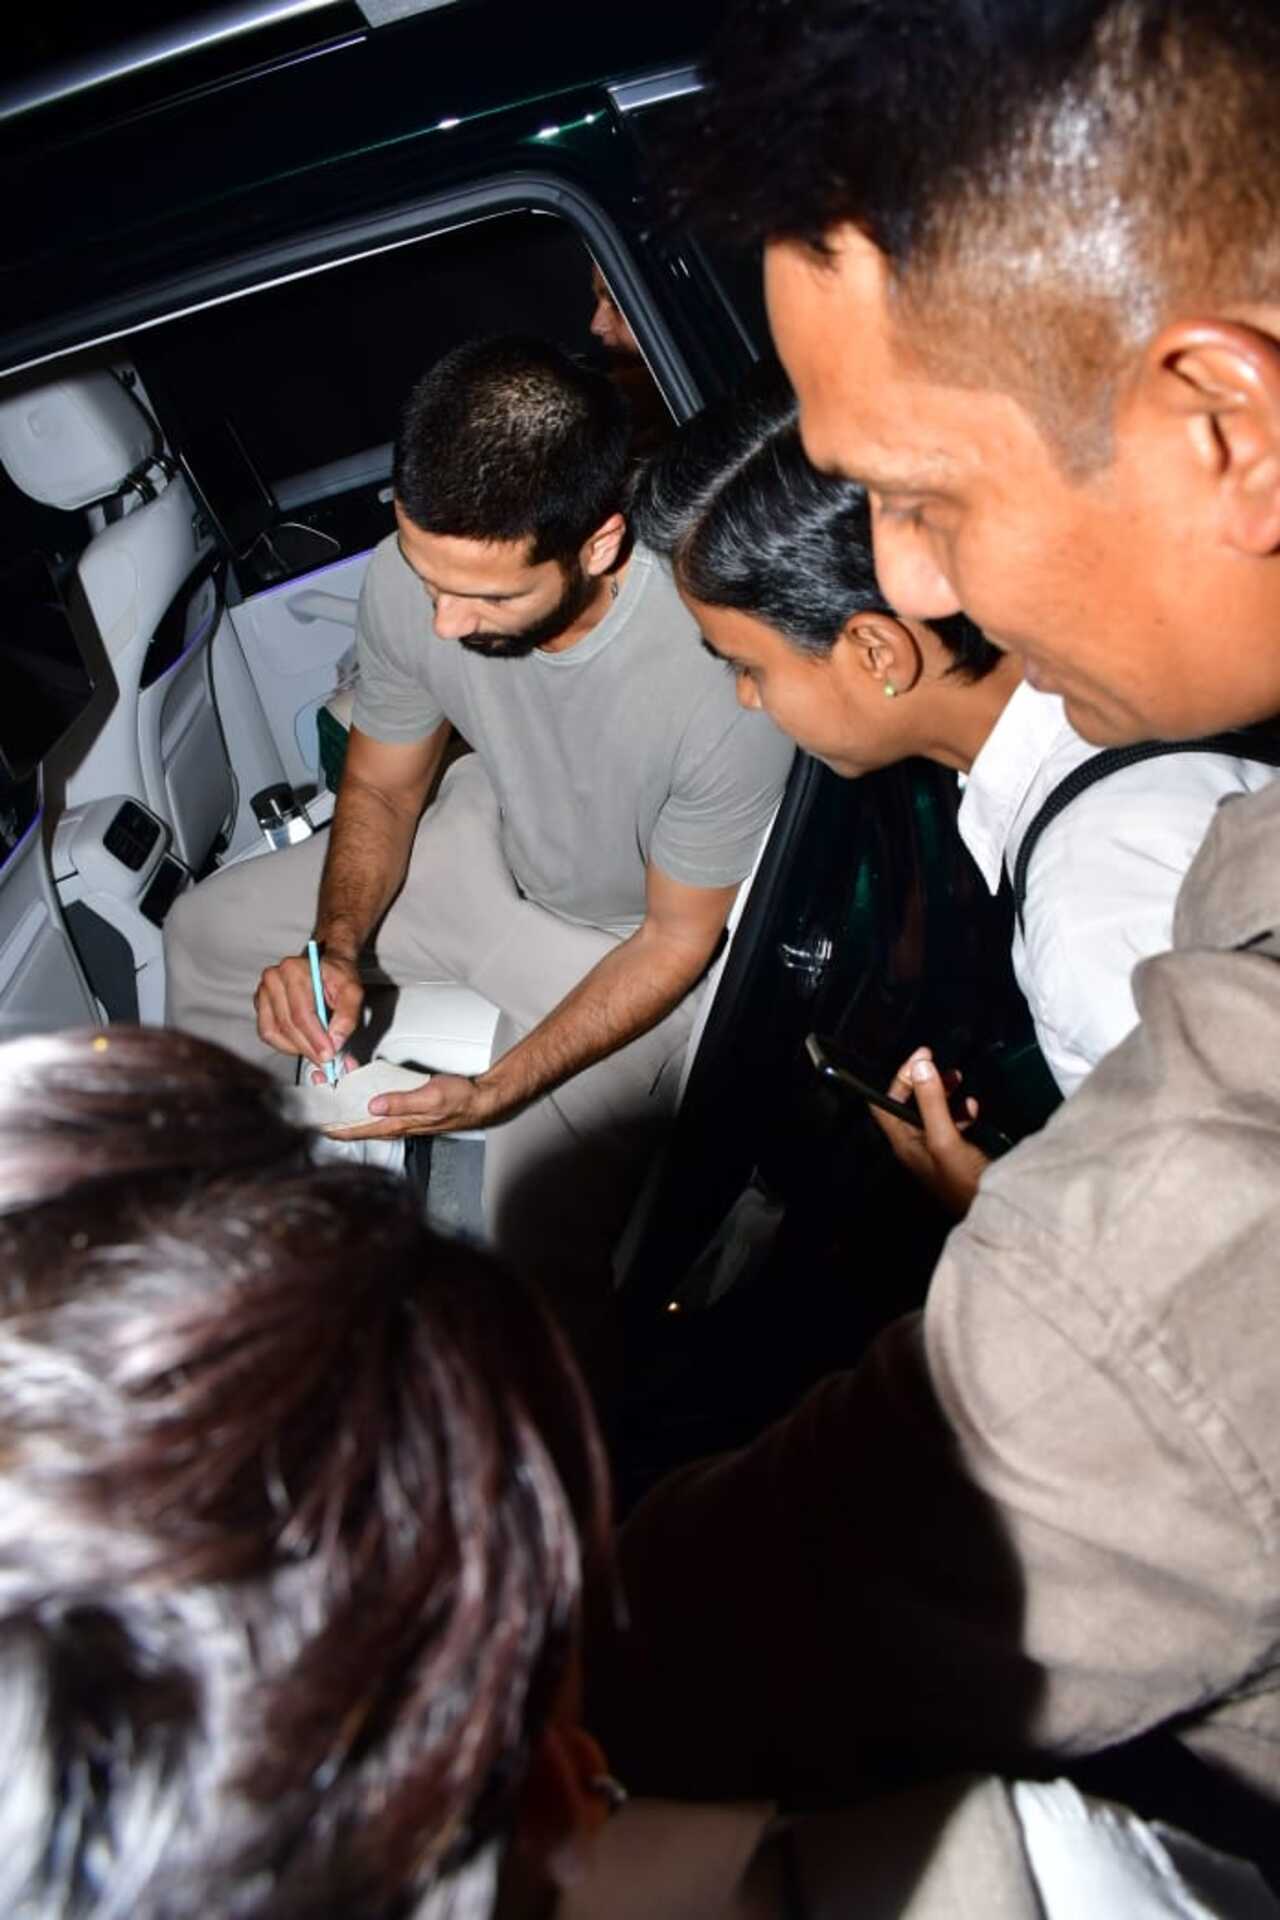 Shahid Kapoor was also spotted in the city with his family. He obliged for autographs and selfies with fans